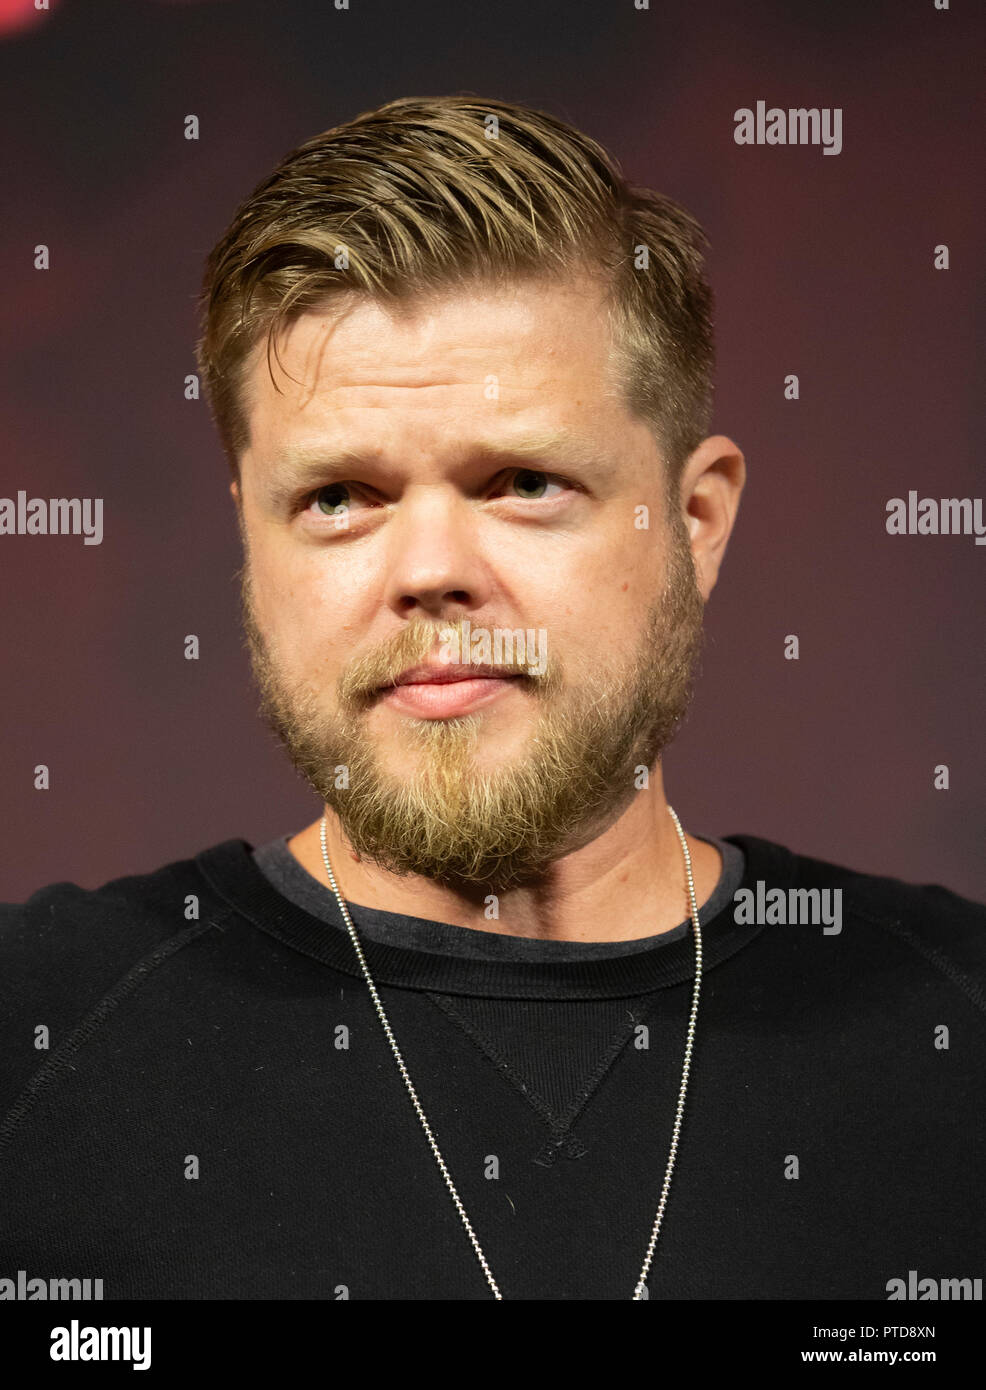 Elden Henson attends Marvel's DAREDEVIL panel during New York Comic Con at Hulu Theater at Madison Square Garden (Photo by Lev Radin / Pacific Press) Stock Photo